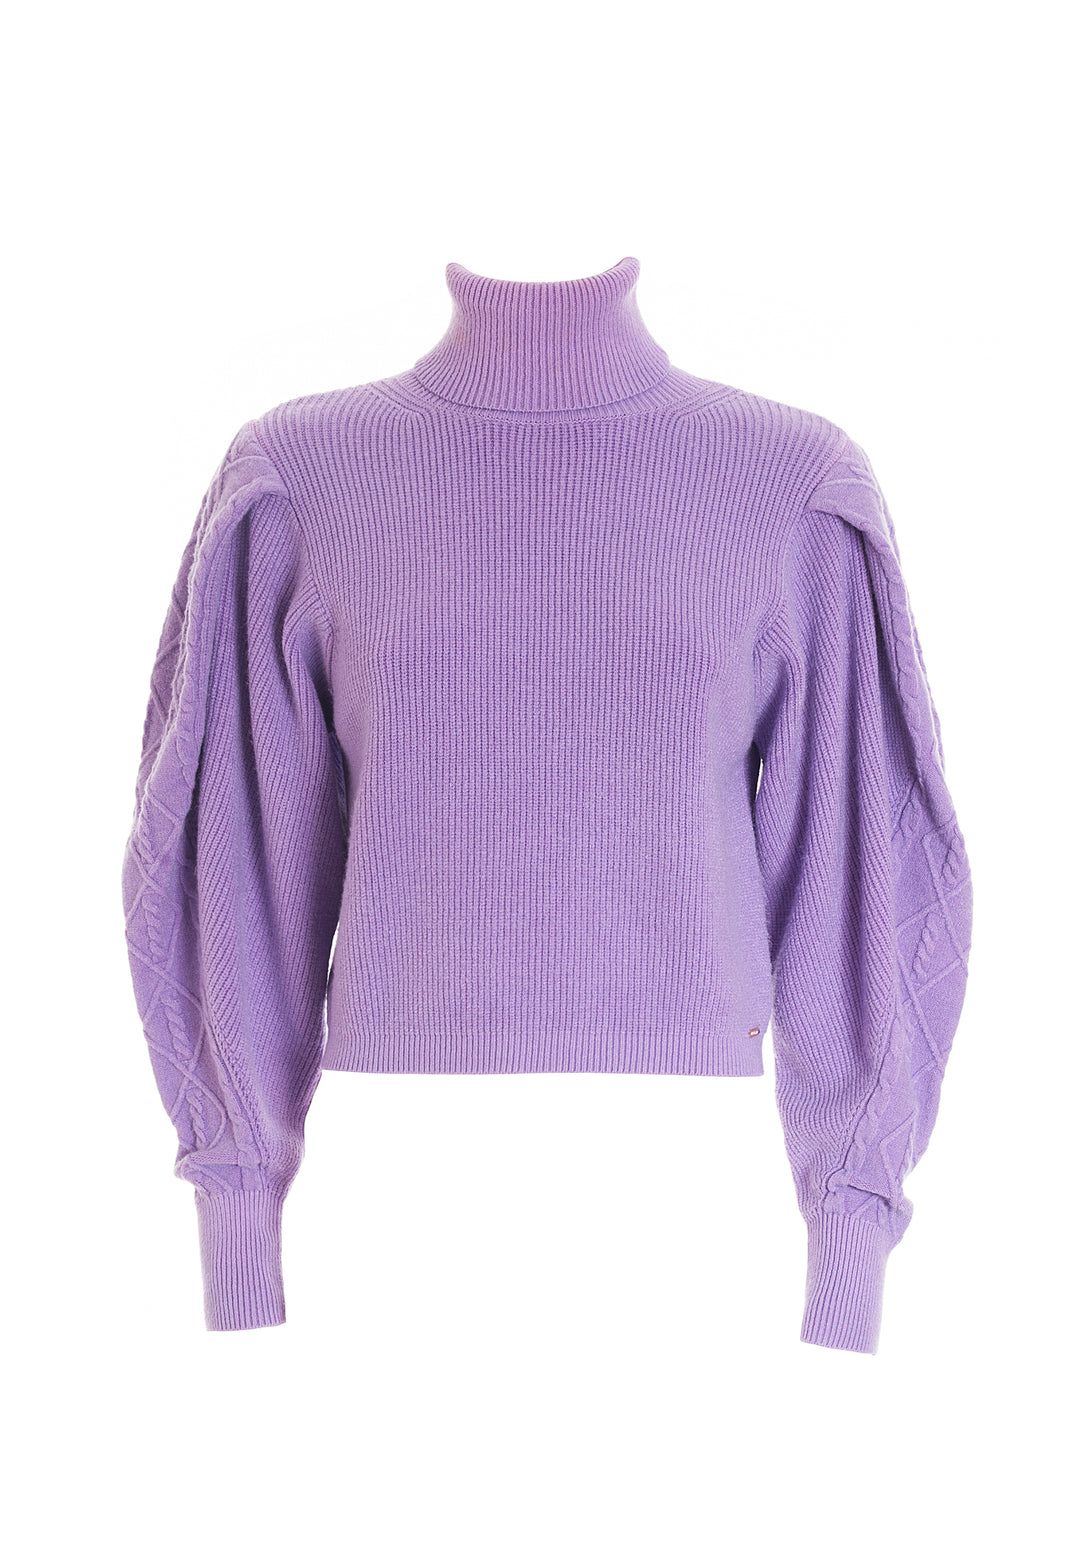 Knitwear slim fit with ribs and high neck